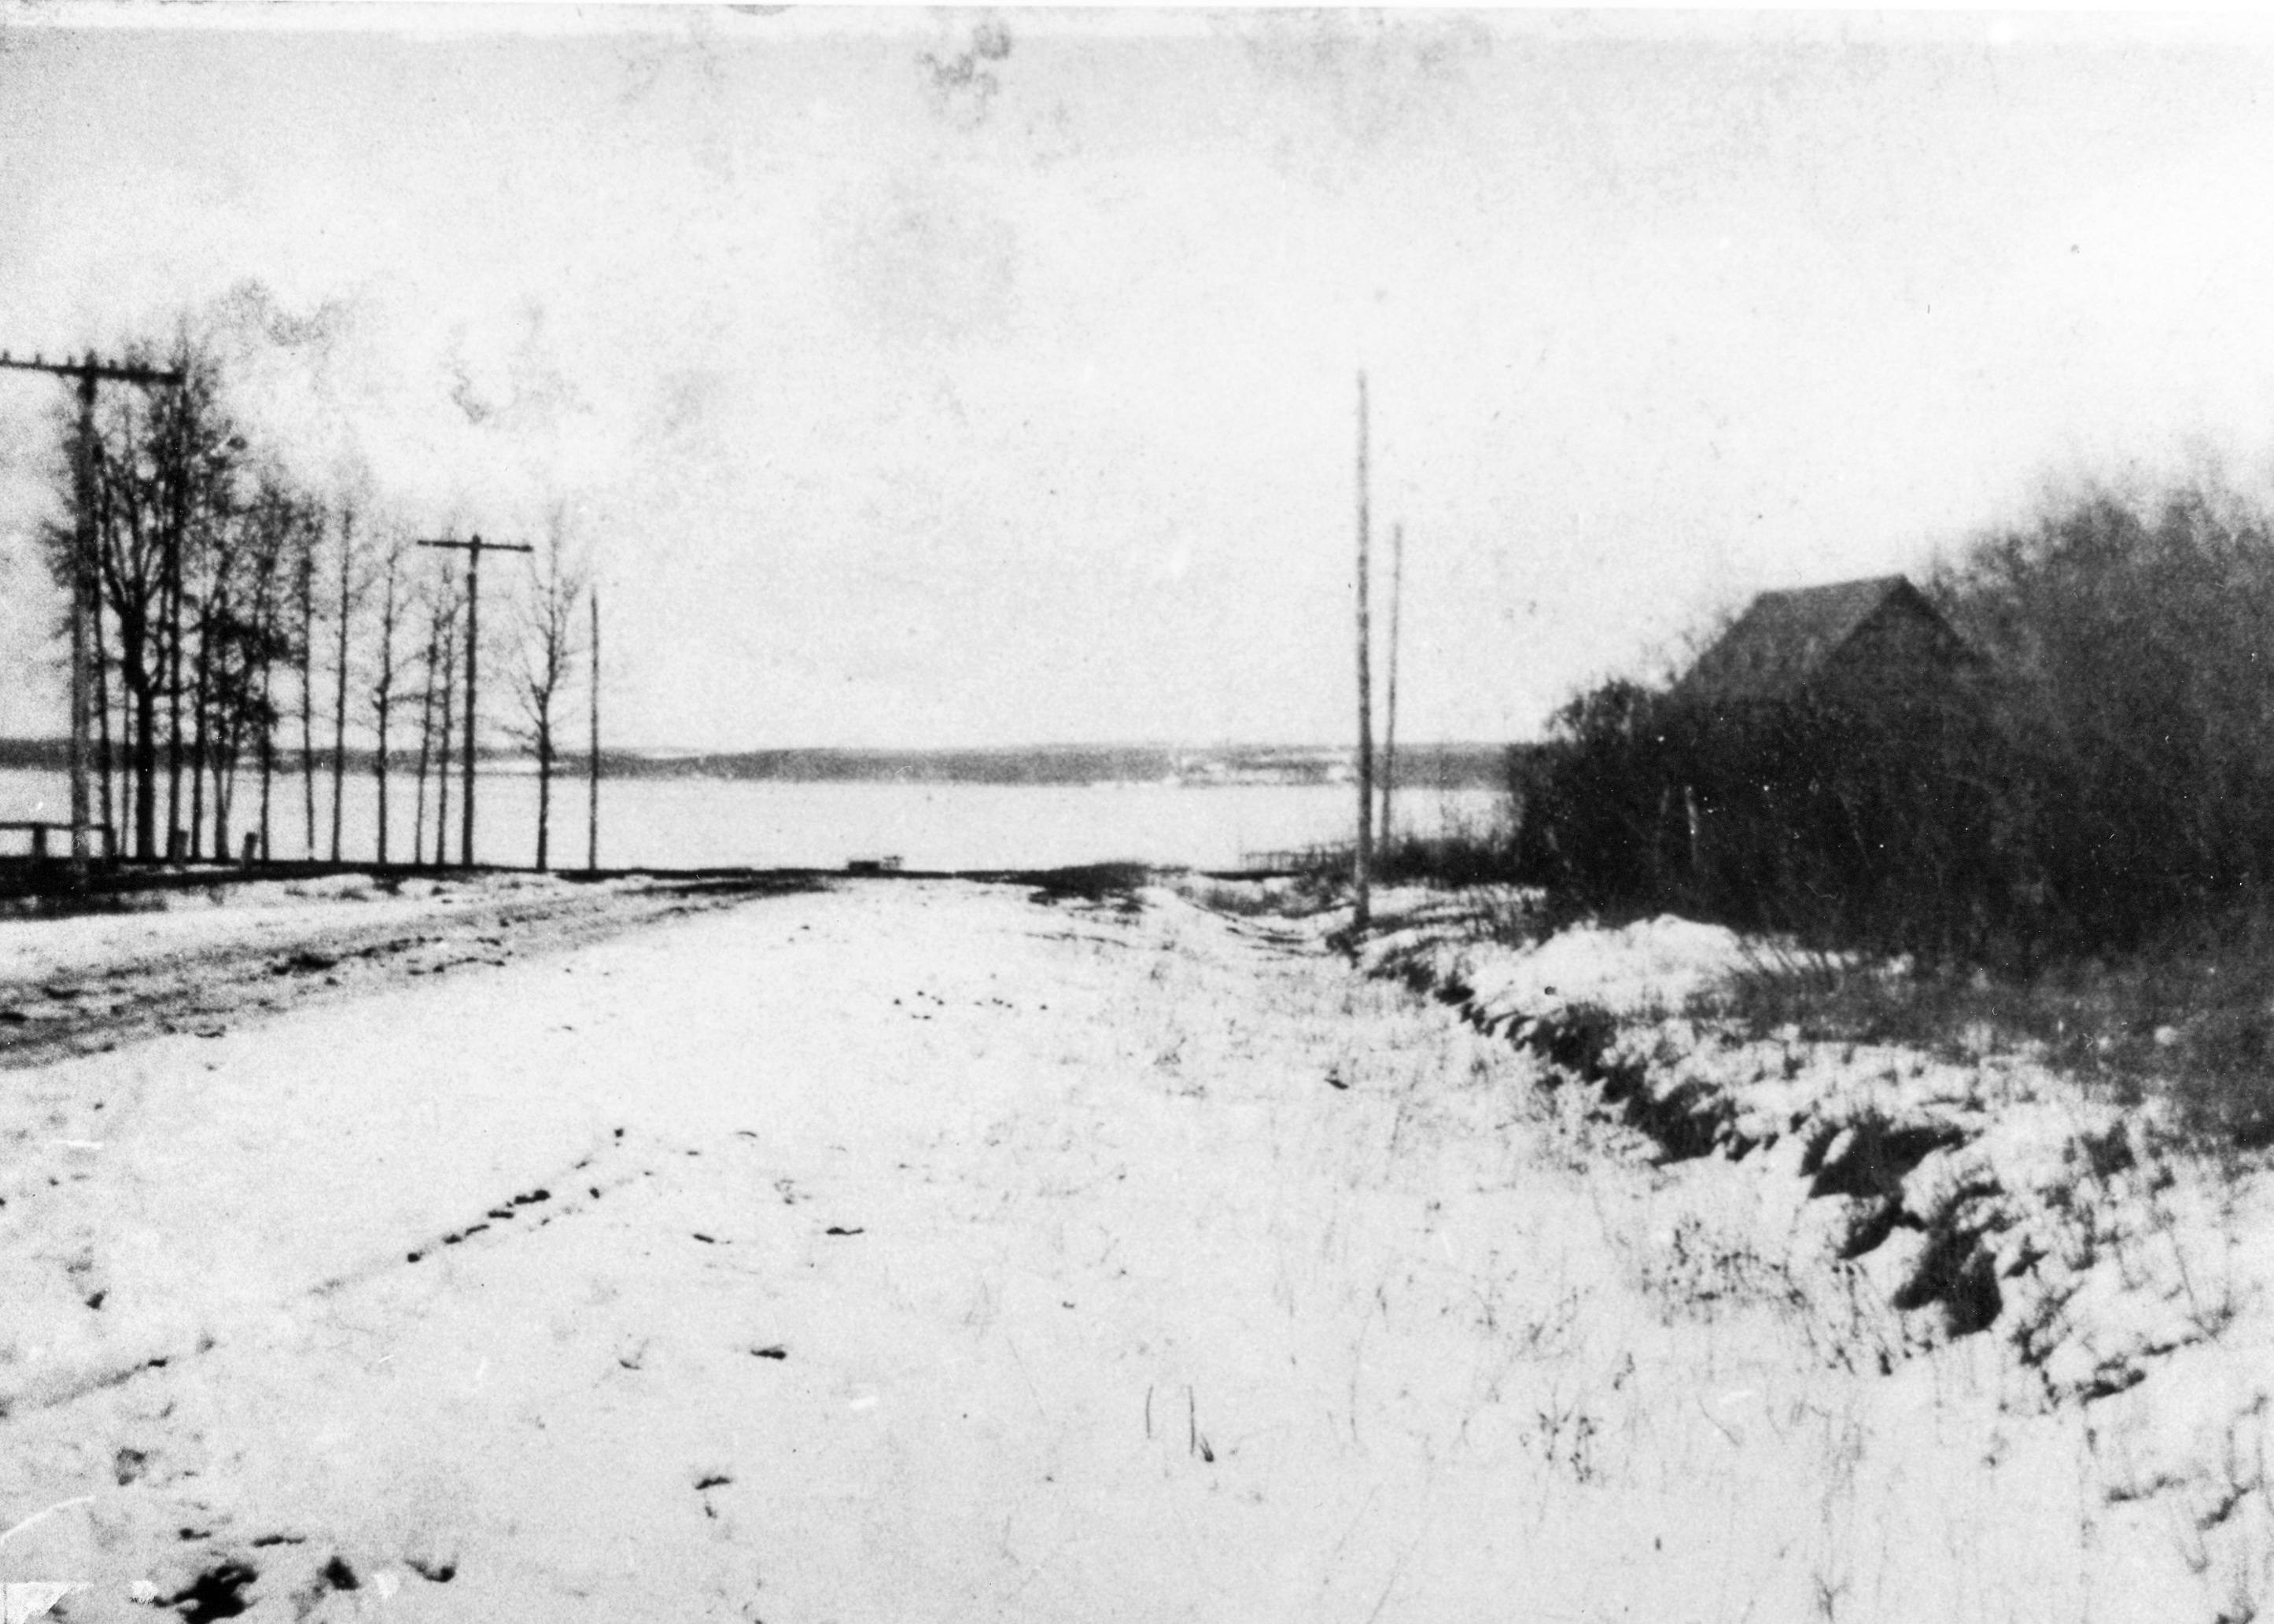 EARLY DAYS- Sylvan Lake's Main (50) St. c. 1905. The building on the right side of the photo is the Loiselle store.